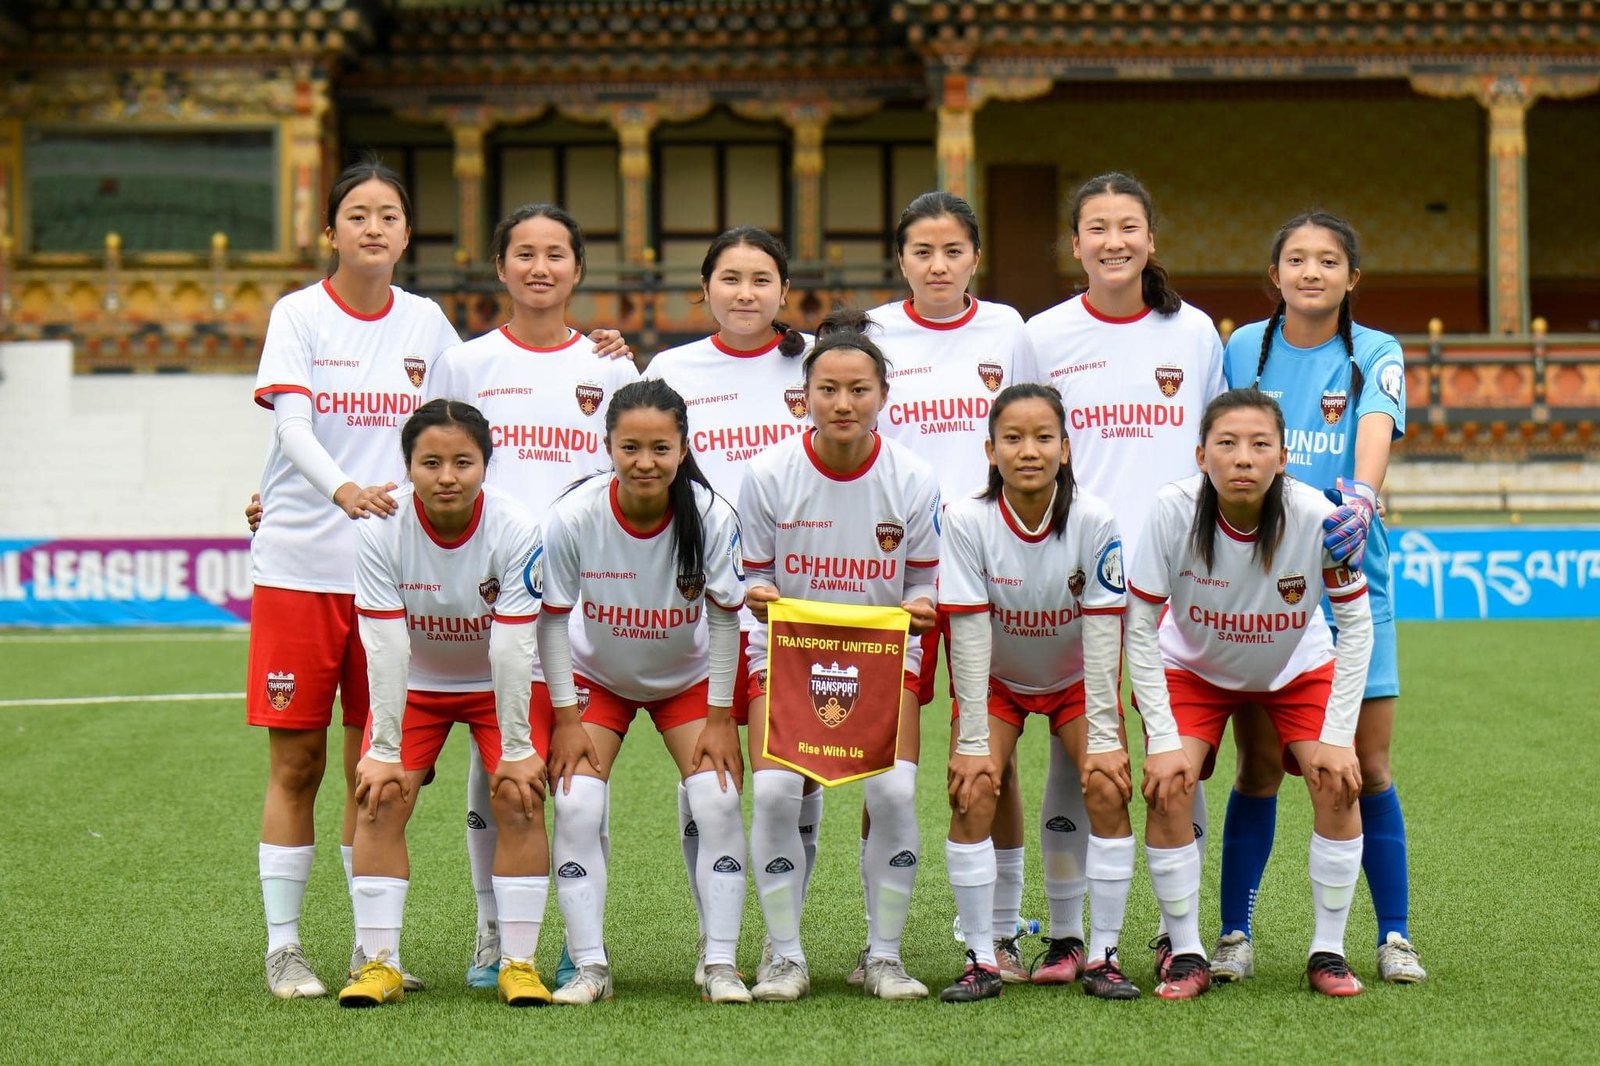 Transport United FC Ladies Demolish Panchali WFC with Record-Breaking 33-0 Victory in Bhutan Women’s National League